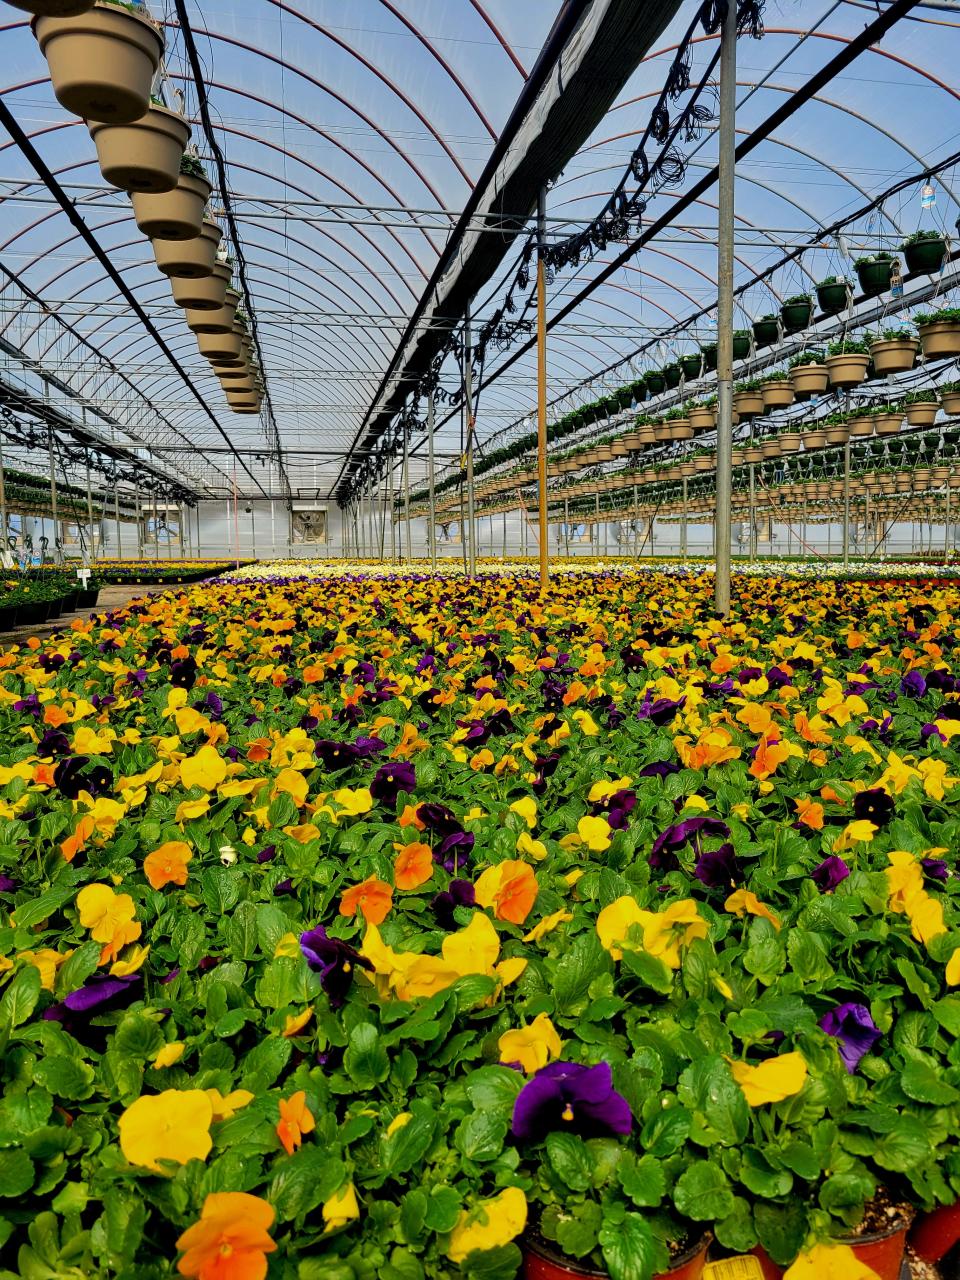 Celebrations of spring and Horticultural Therapy Week will take place around the Garden State. Many of the plants and horticultural products are produced in New Jersey. According to the latest Agriculture Census, New Jersey commodities produce $725 million among 1,237 farms, ranking in the top 10 across the U.S.